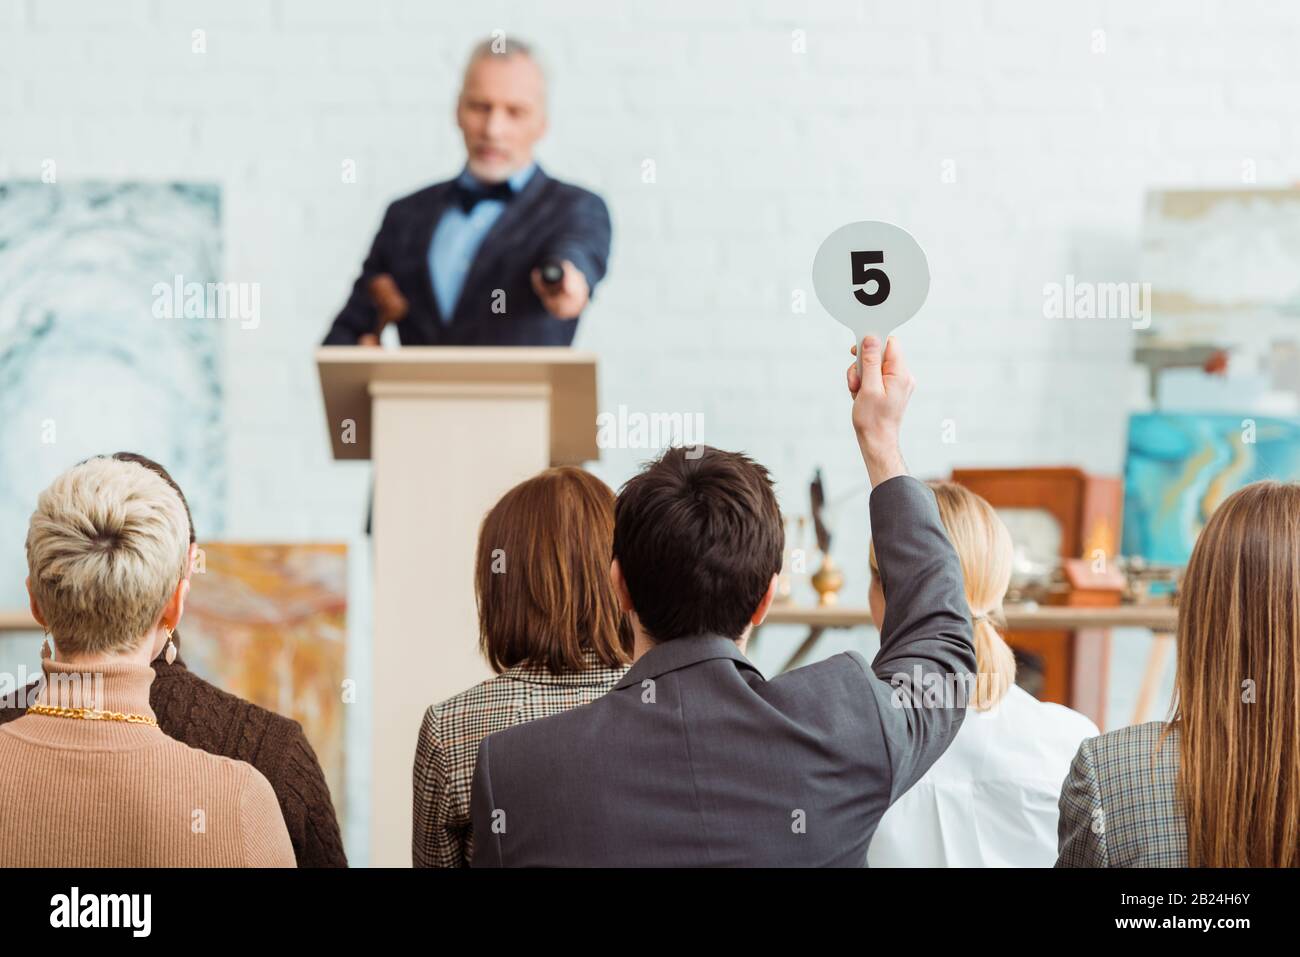 back view of buyer showing auction paddle with number five to auctioneer during auction Stock Photo